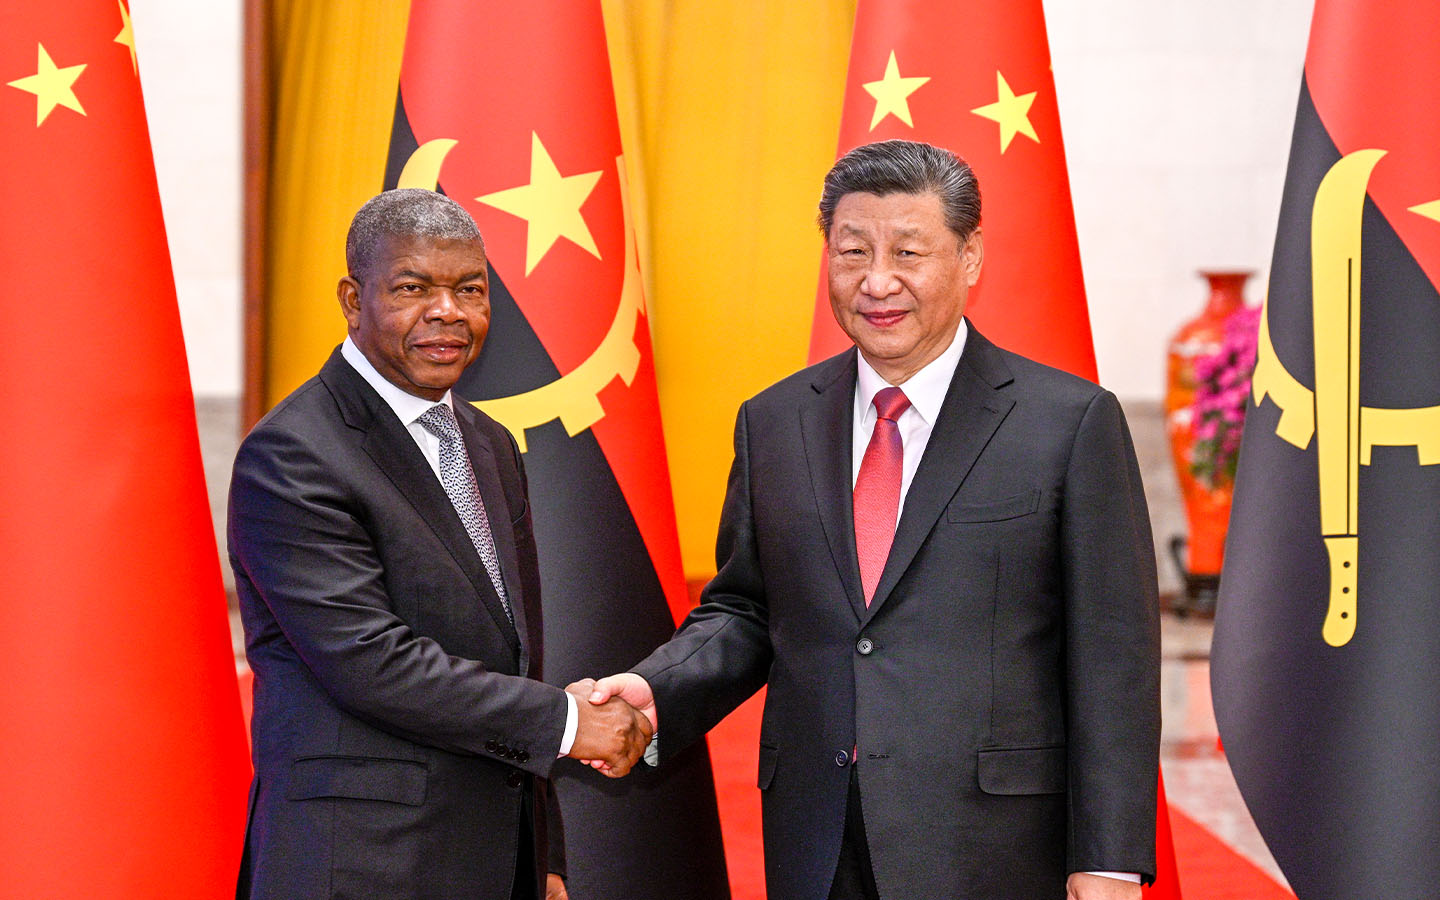 Angola and China agree to strengthen ties